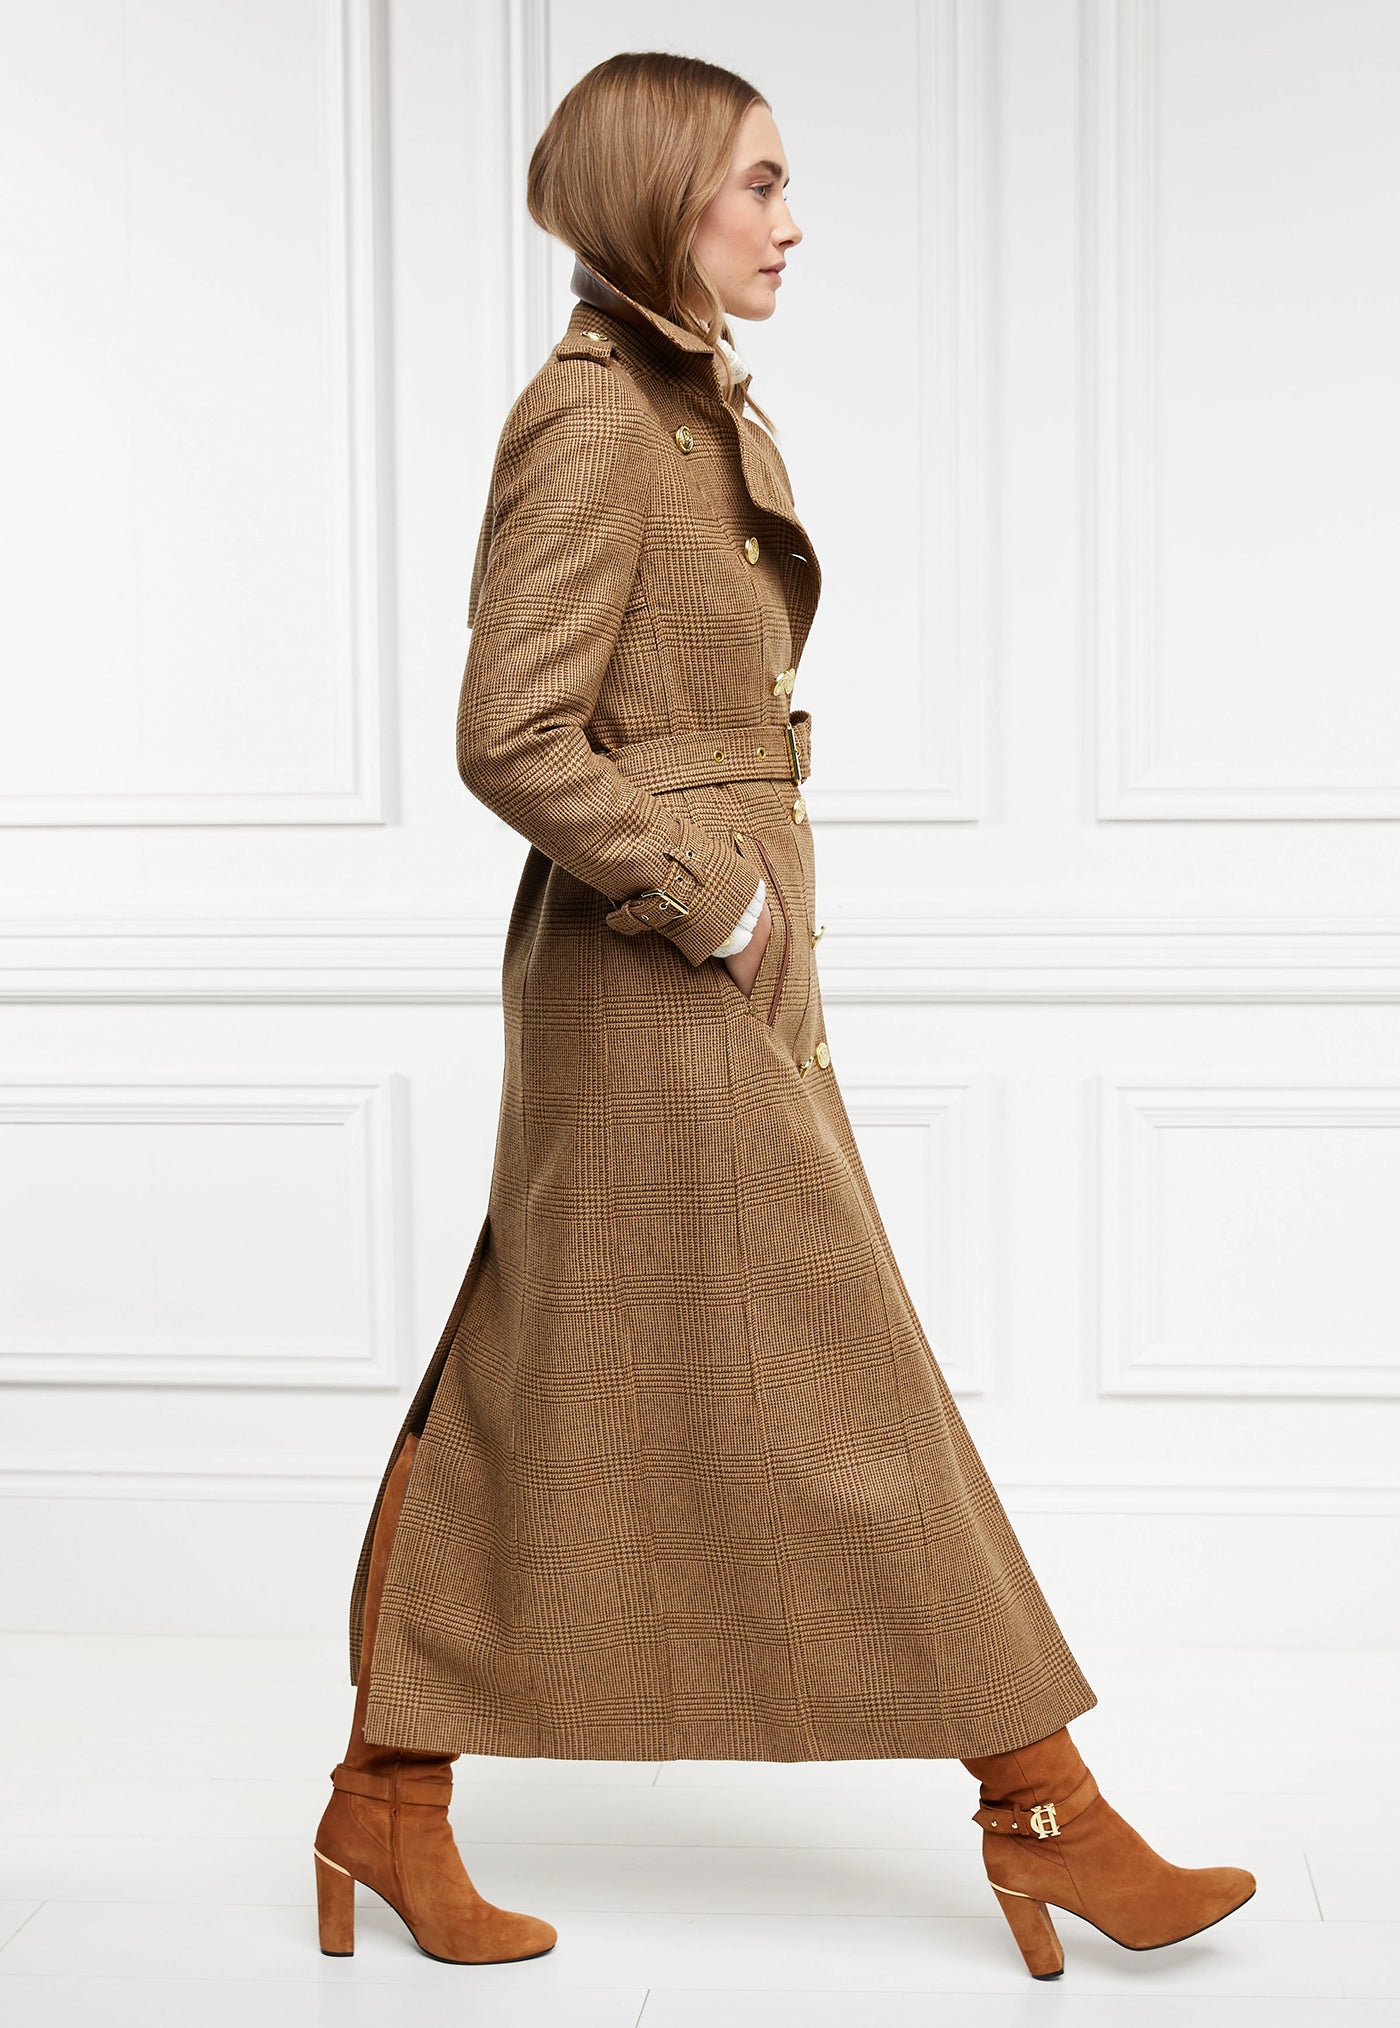 Marlborough Trench Coat Full Length - Tawny sold by Angel Divine